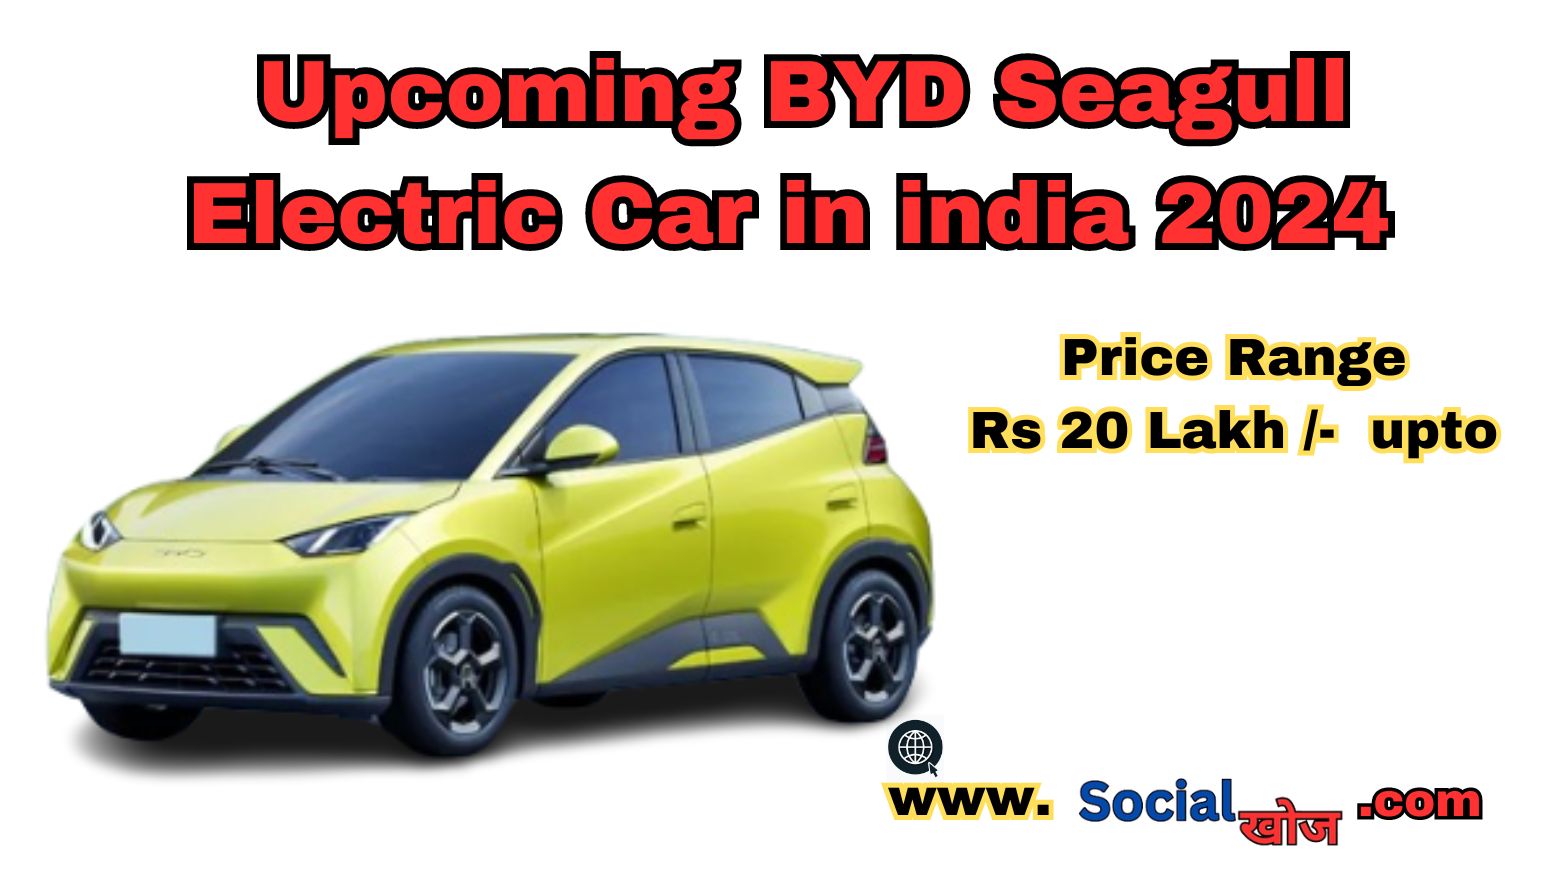 BYD Seagull Electric car in india Overview